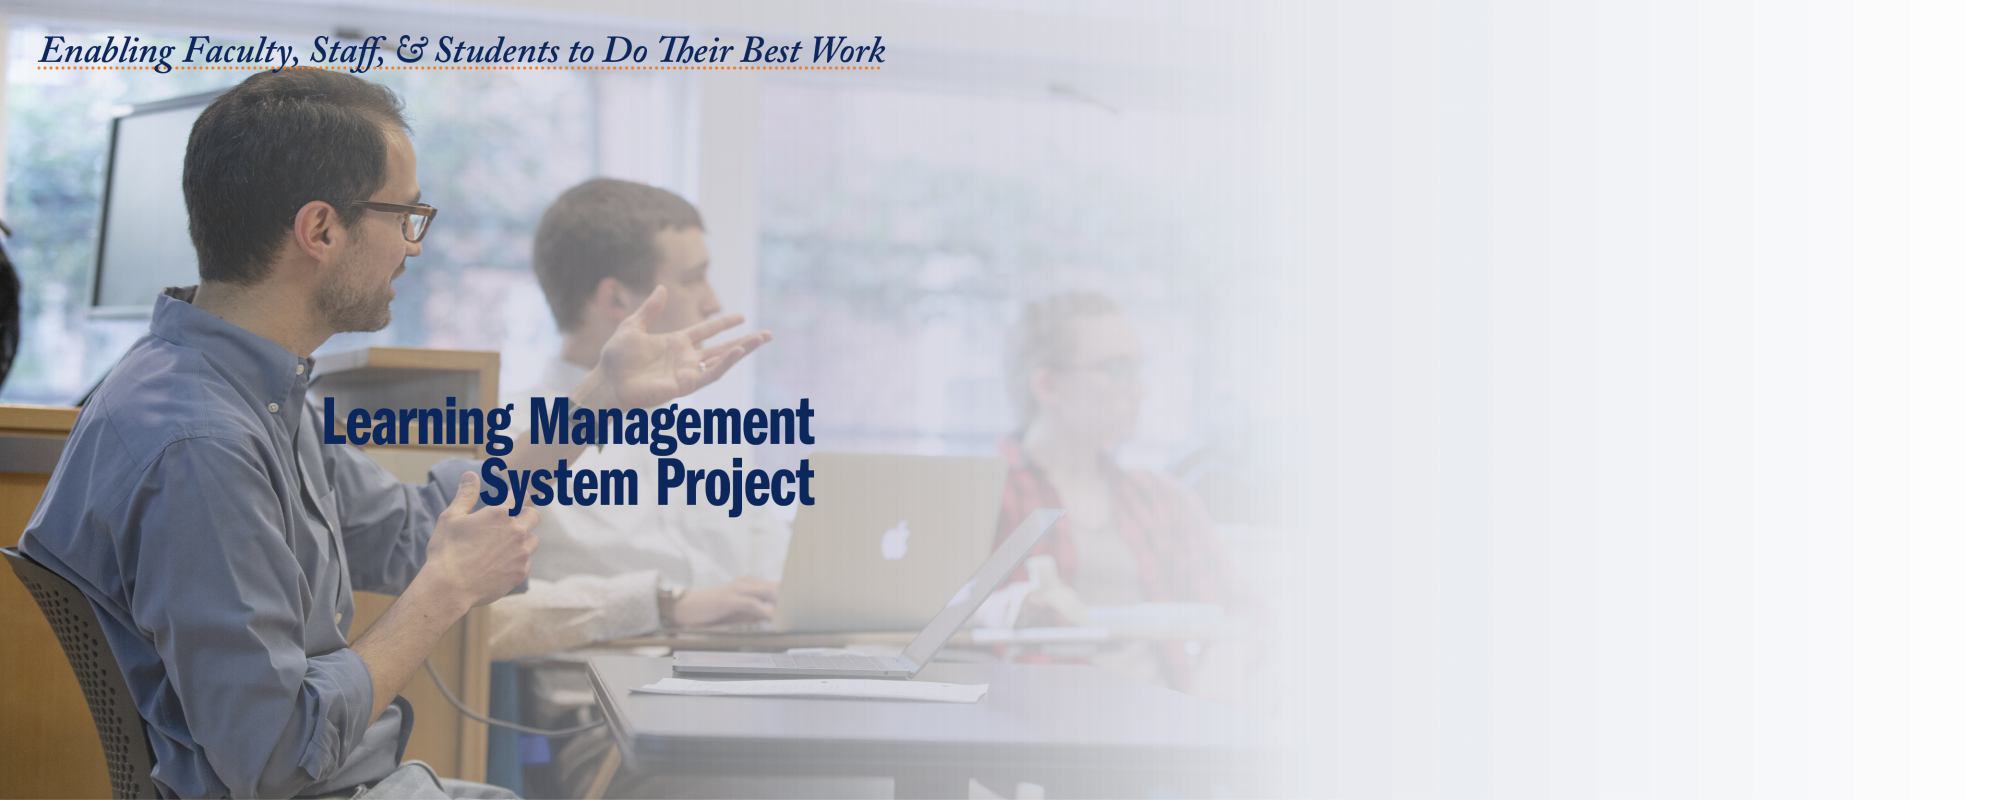 Learning Management System Project